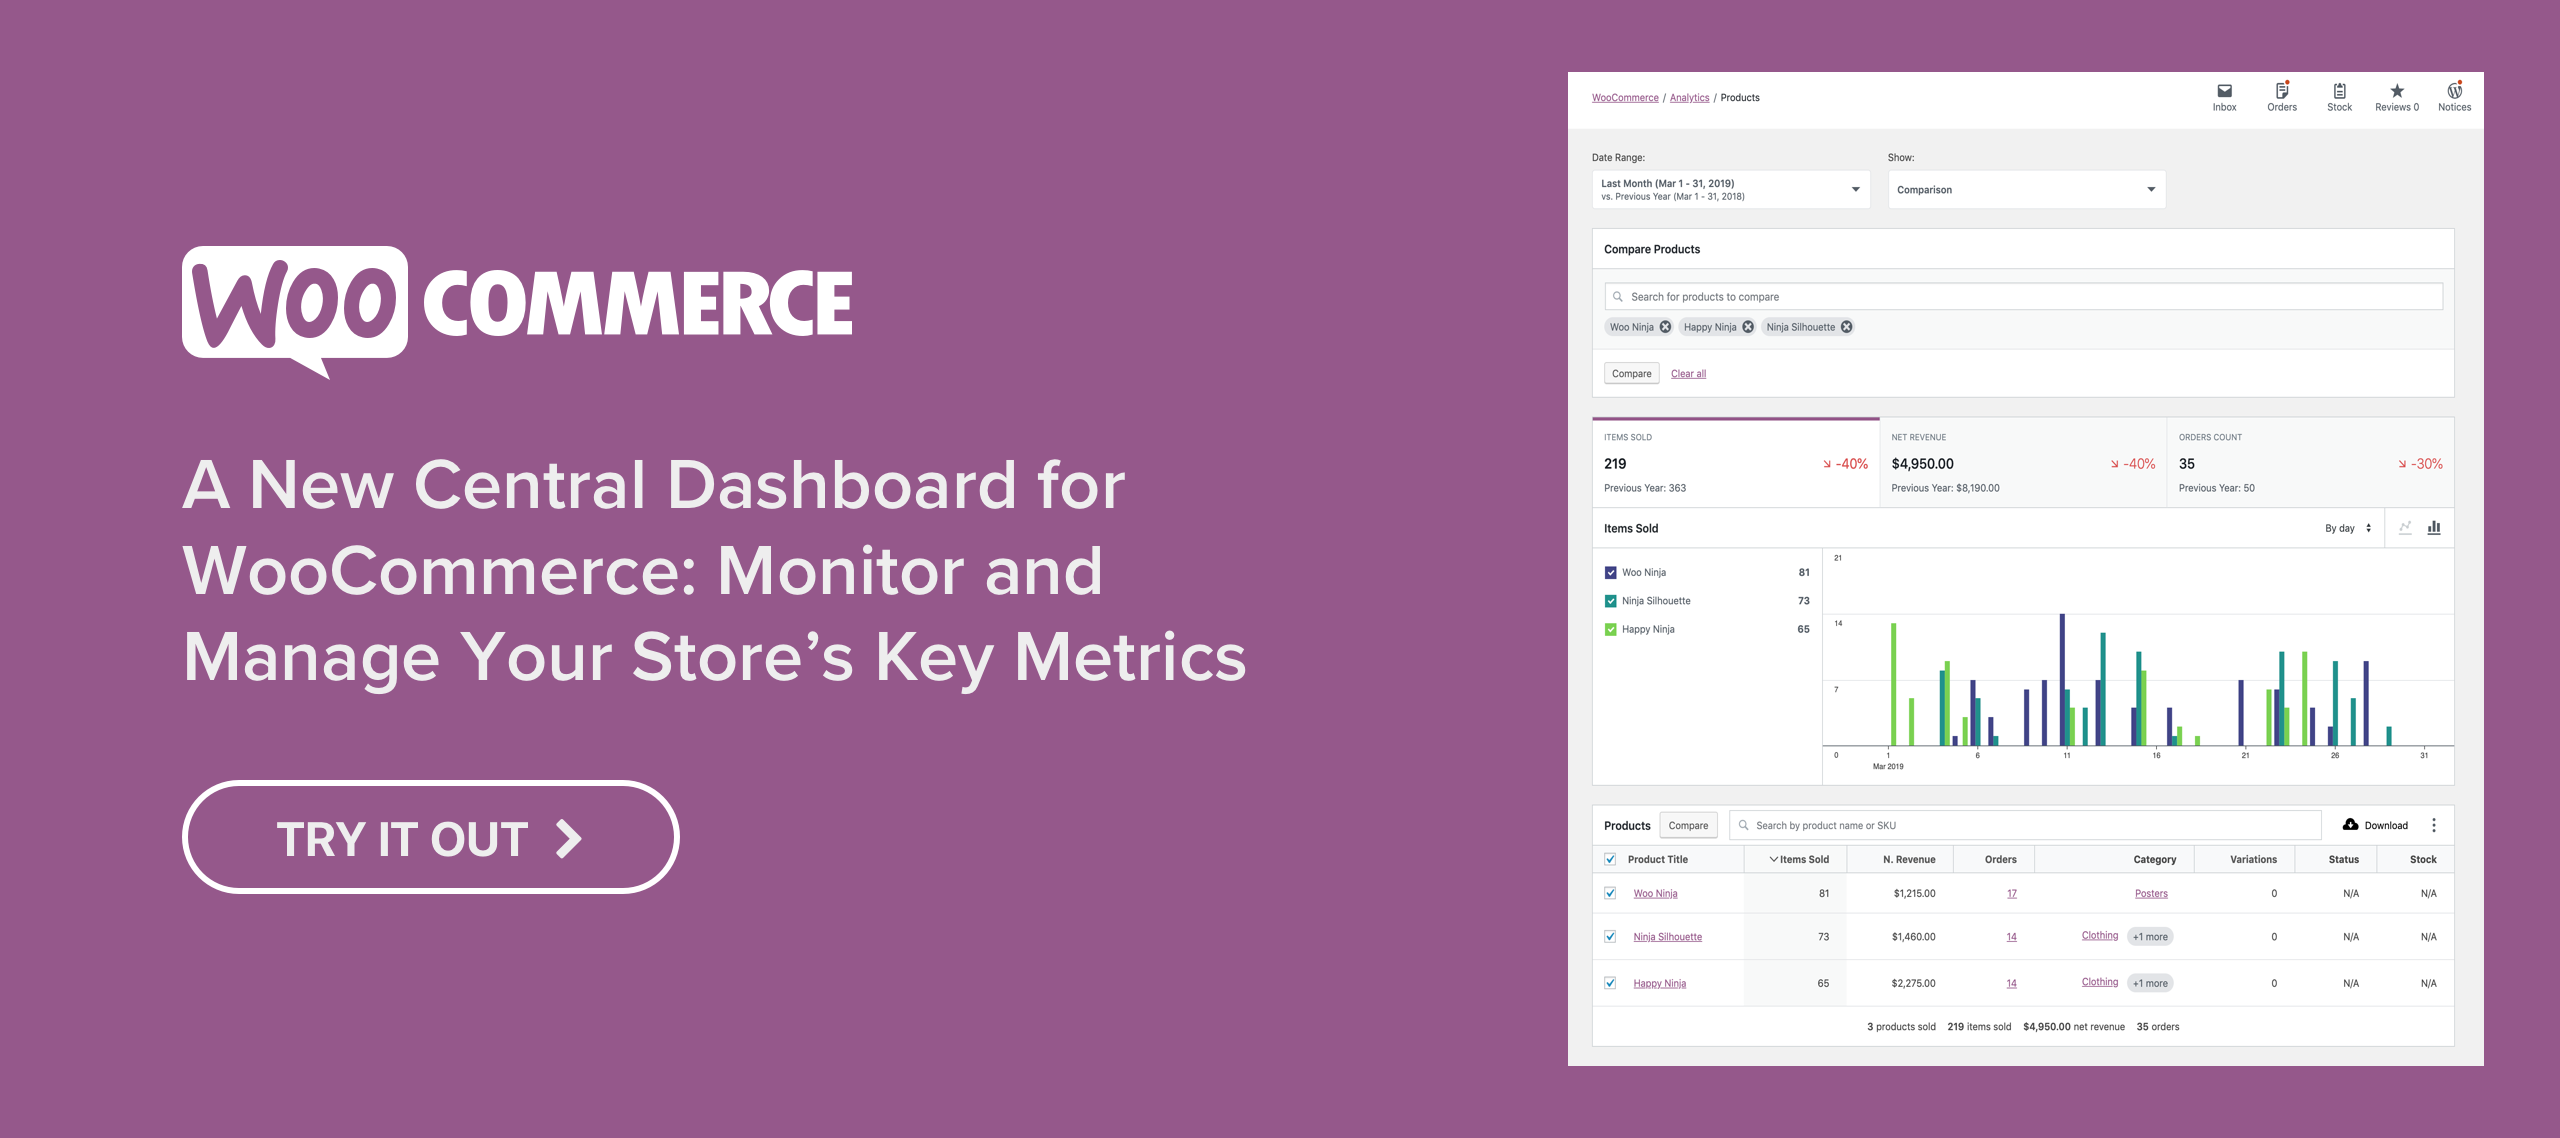 A new central dashboard for WooCommerce: Monitor and Manage your store's key metrics